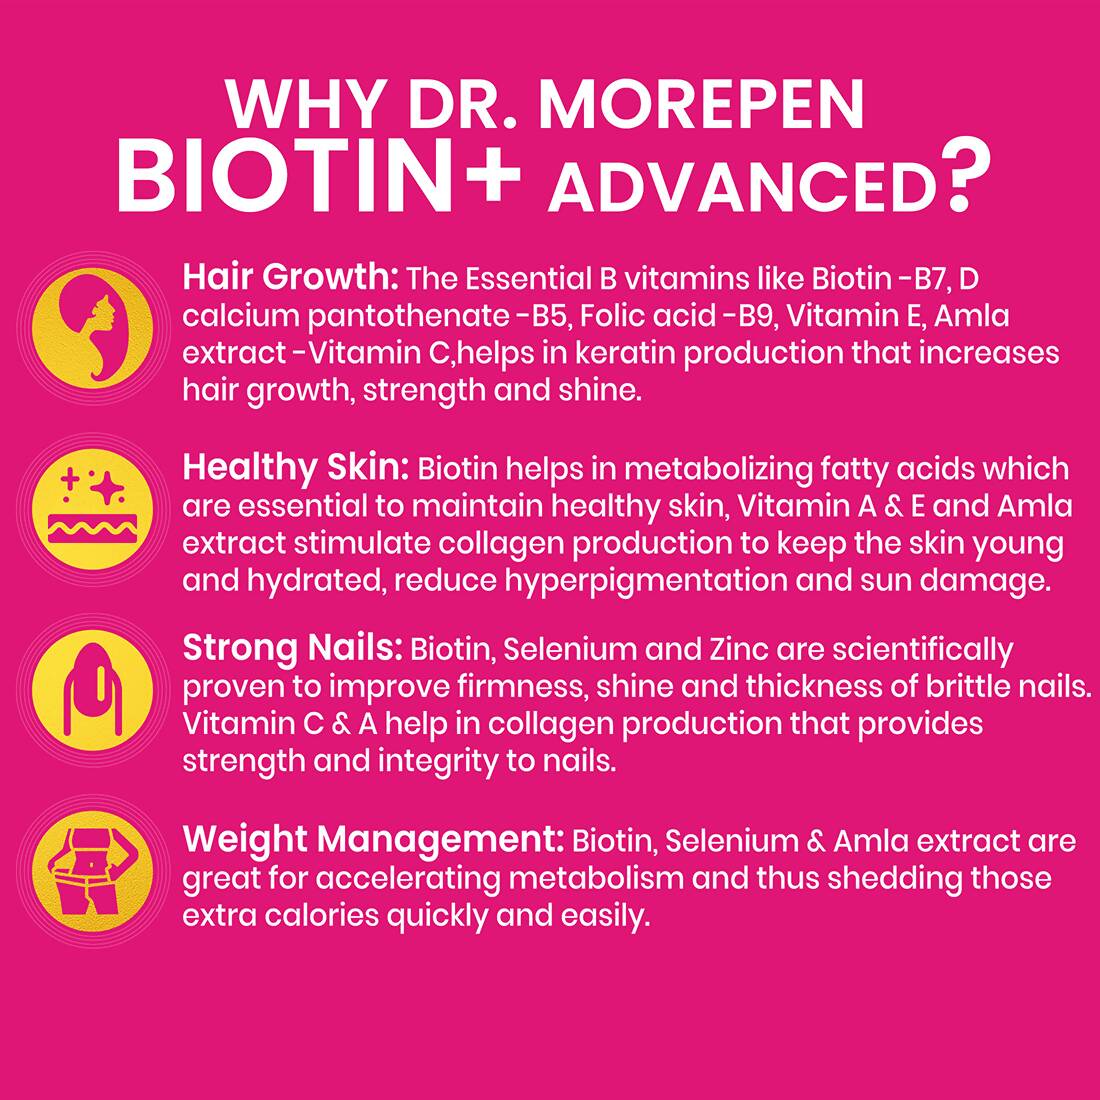 Dr. Morepen Biotin+ Advanced Tablets and Multivitamin Women Tablets Combo - Distacart